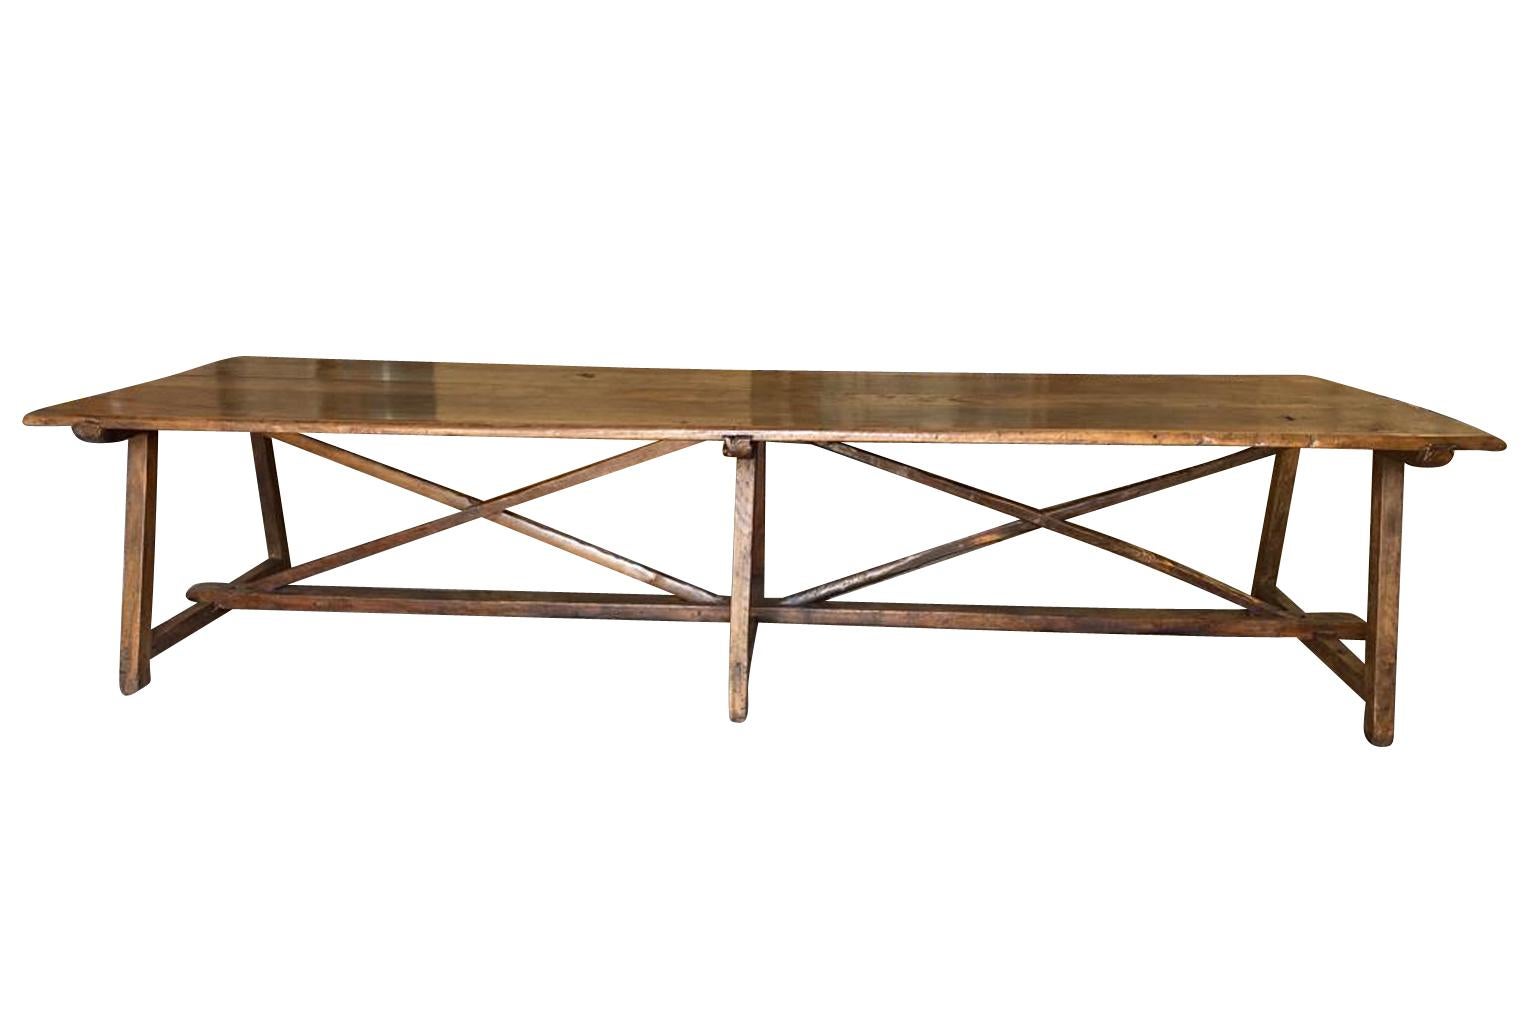 A monumental and exceptional Farm Table - Dining Table from the Piedmont region of Italy.  Beautifully constructed from stunning walnut and chestnut with a very wide plateau and 